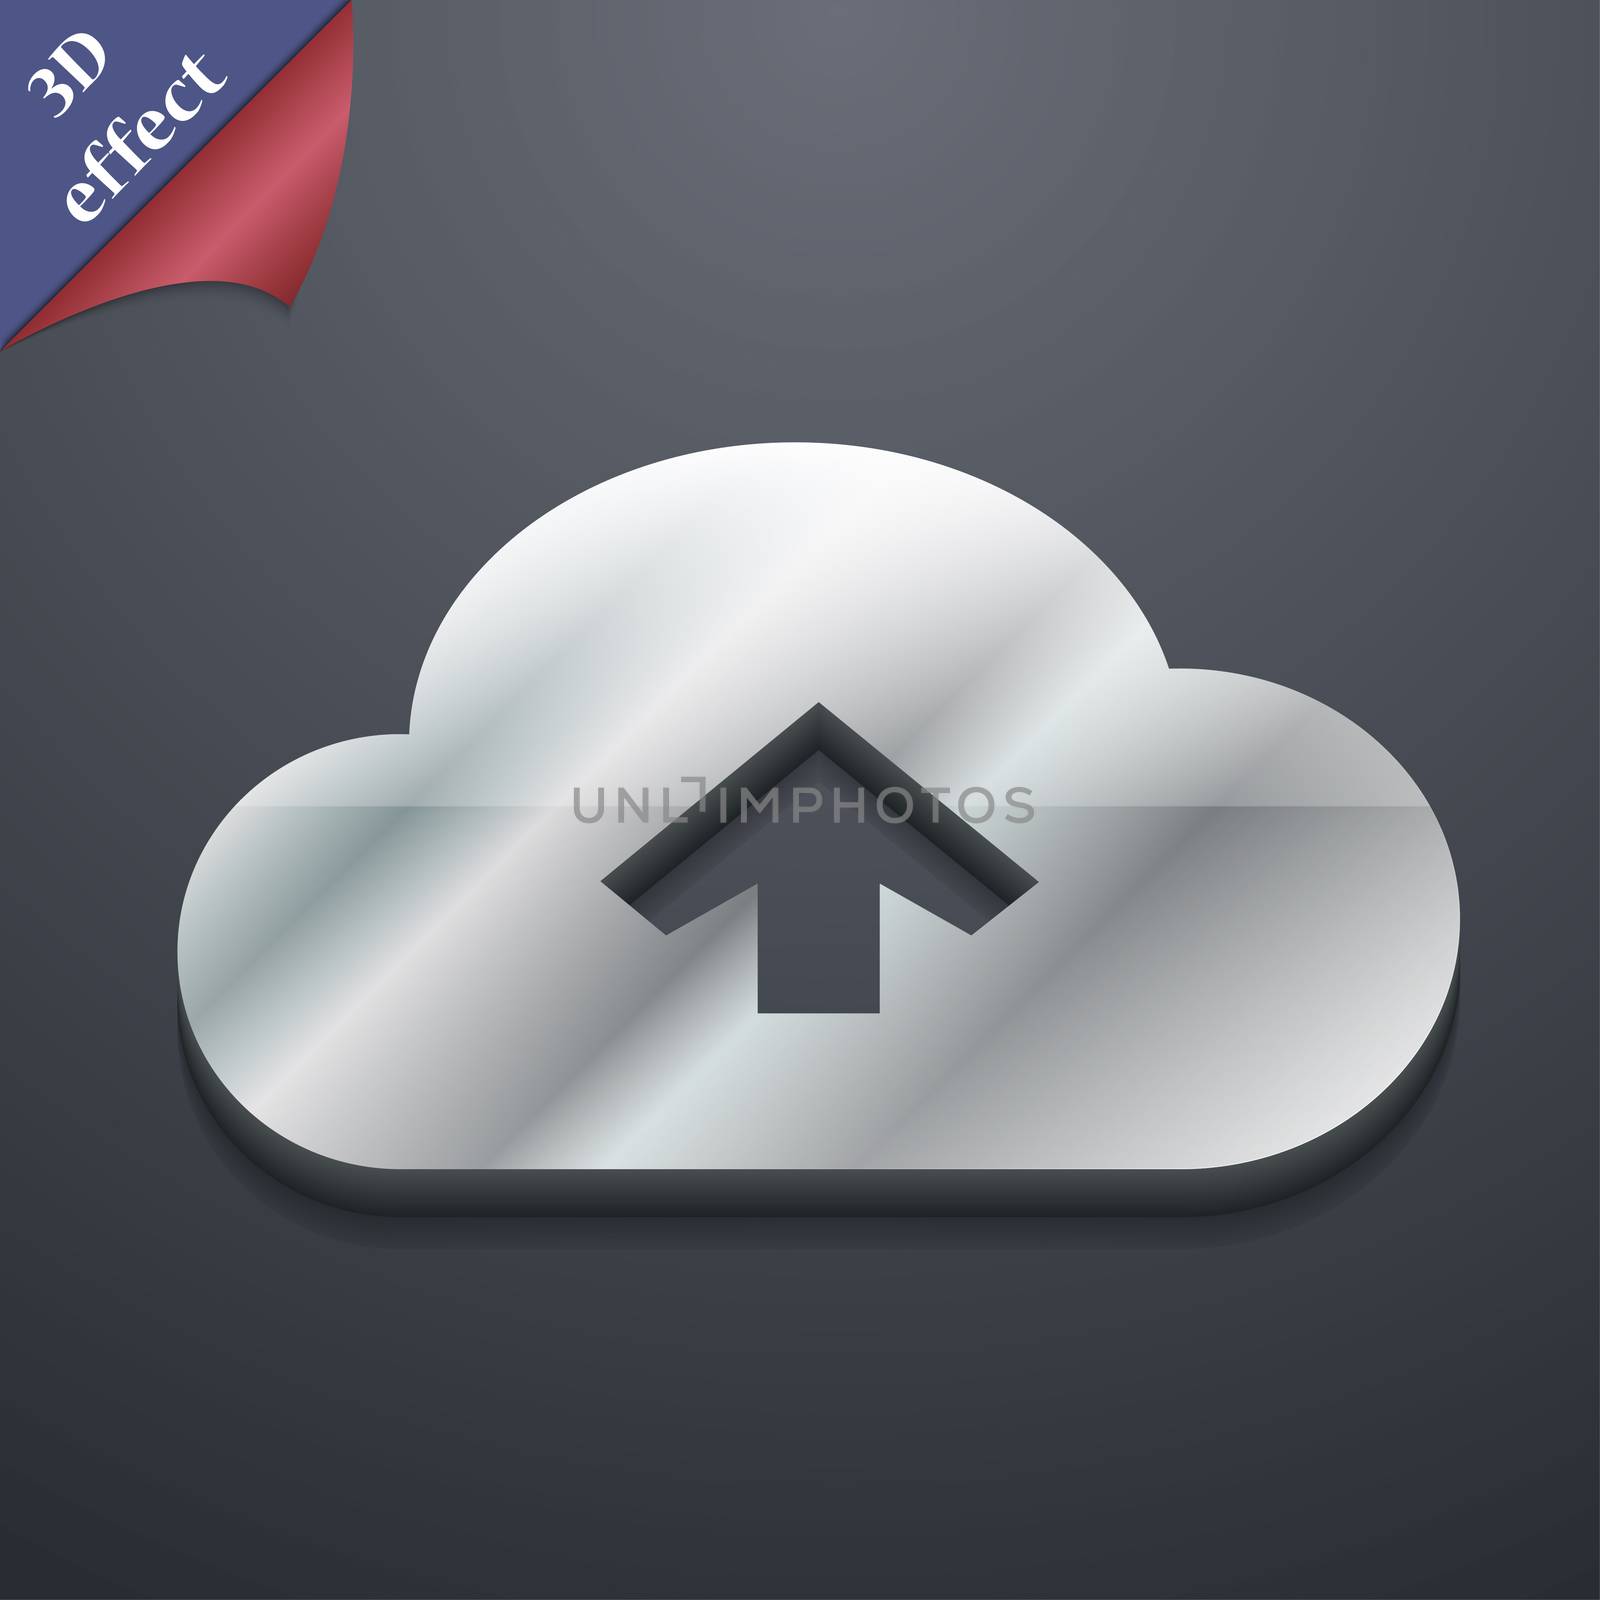 Upload from cloud icon symbol. 3D style. Trendy, modern design with space for your text illustration. Rastrized copy